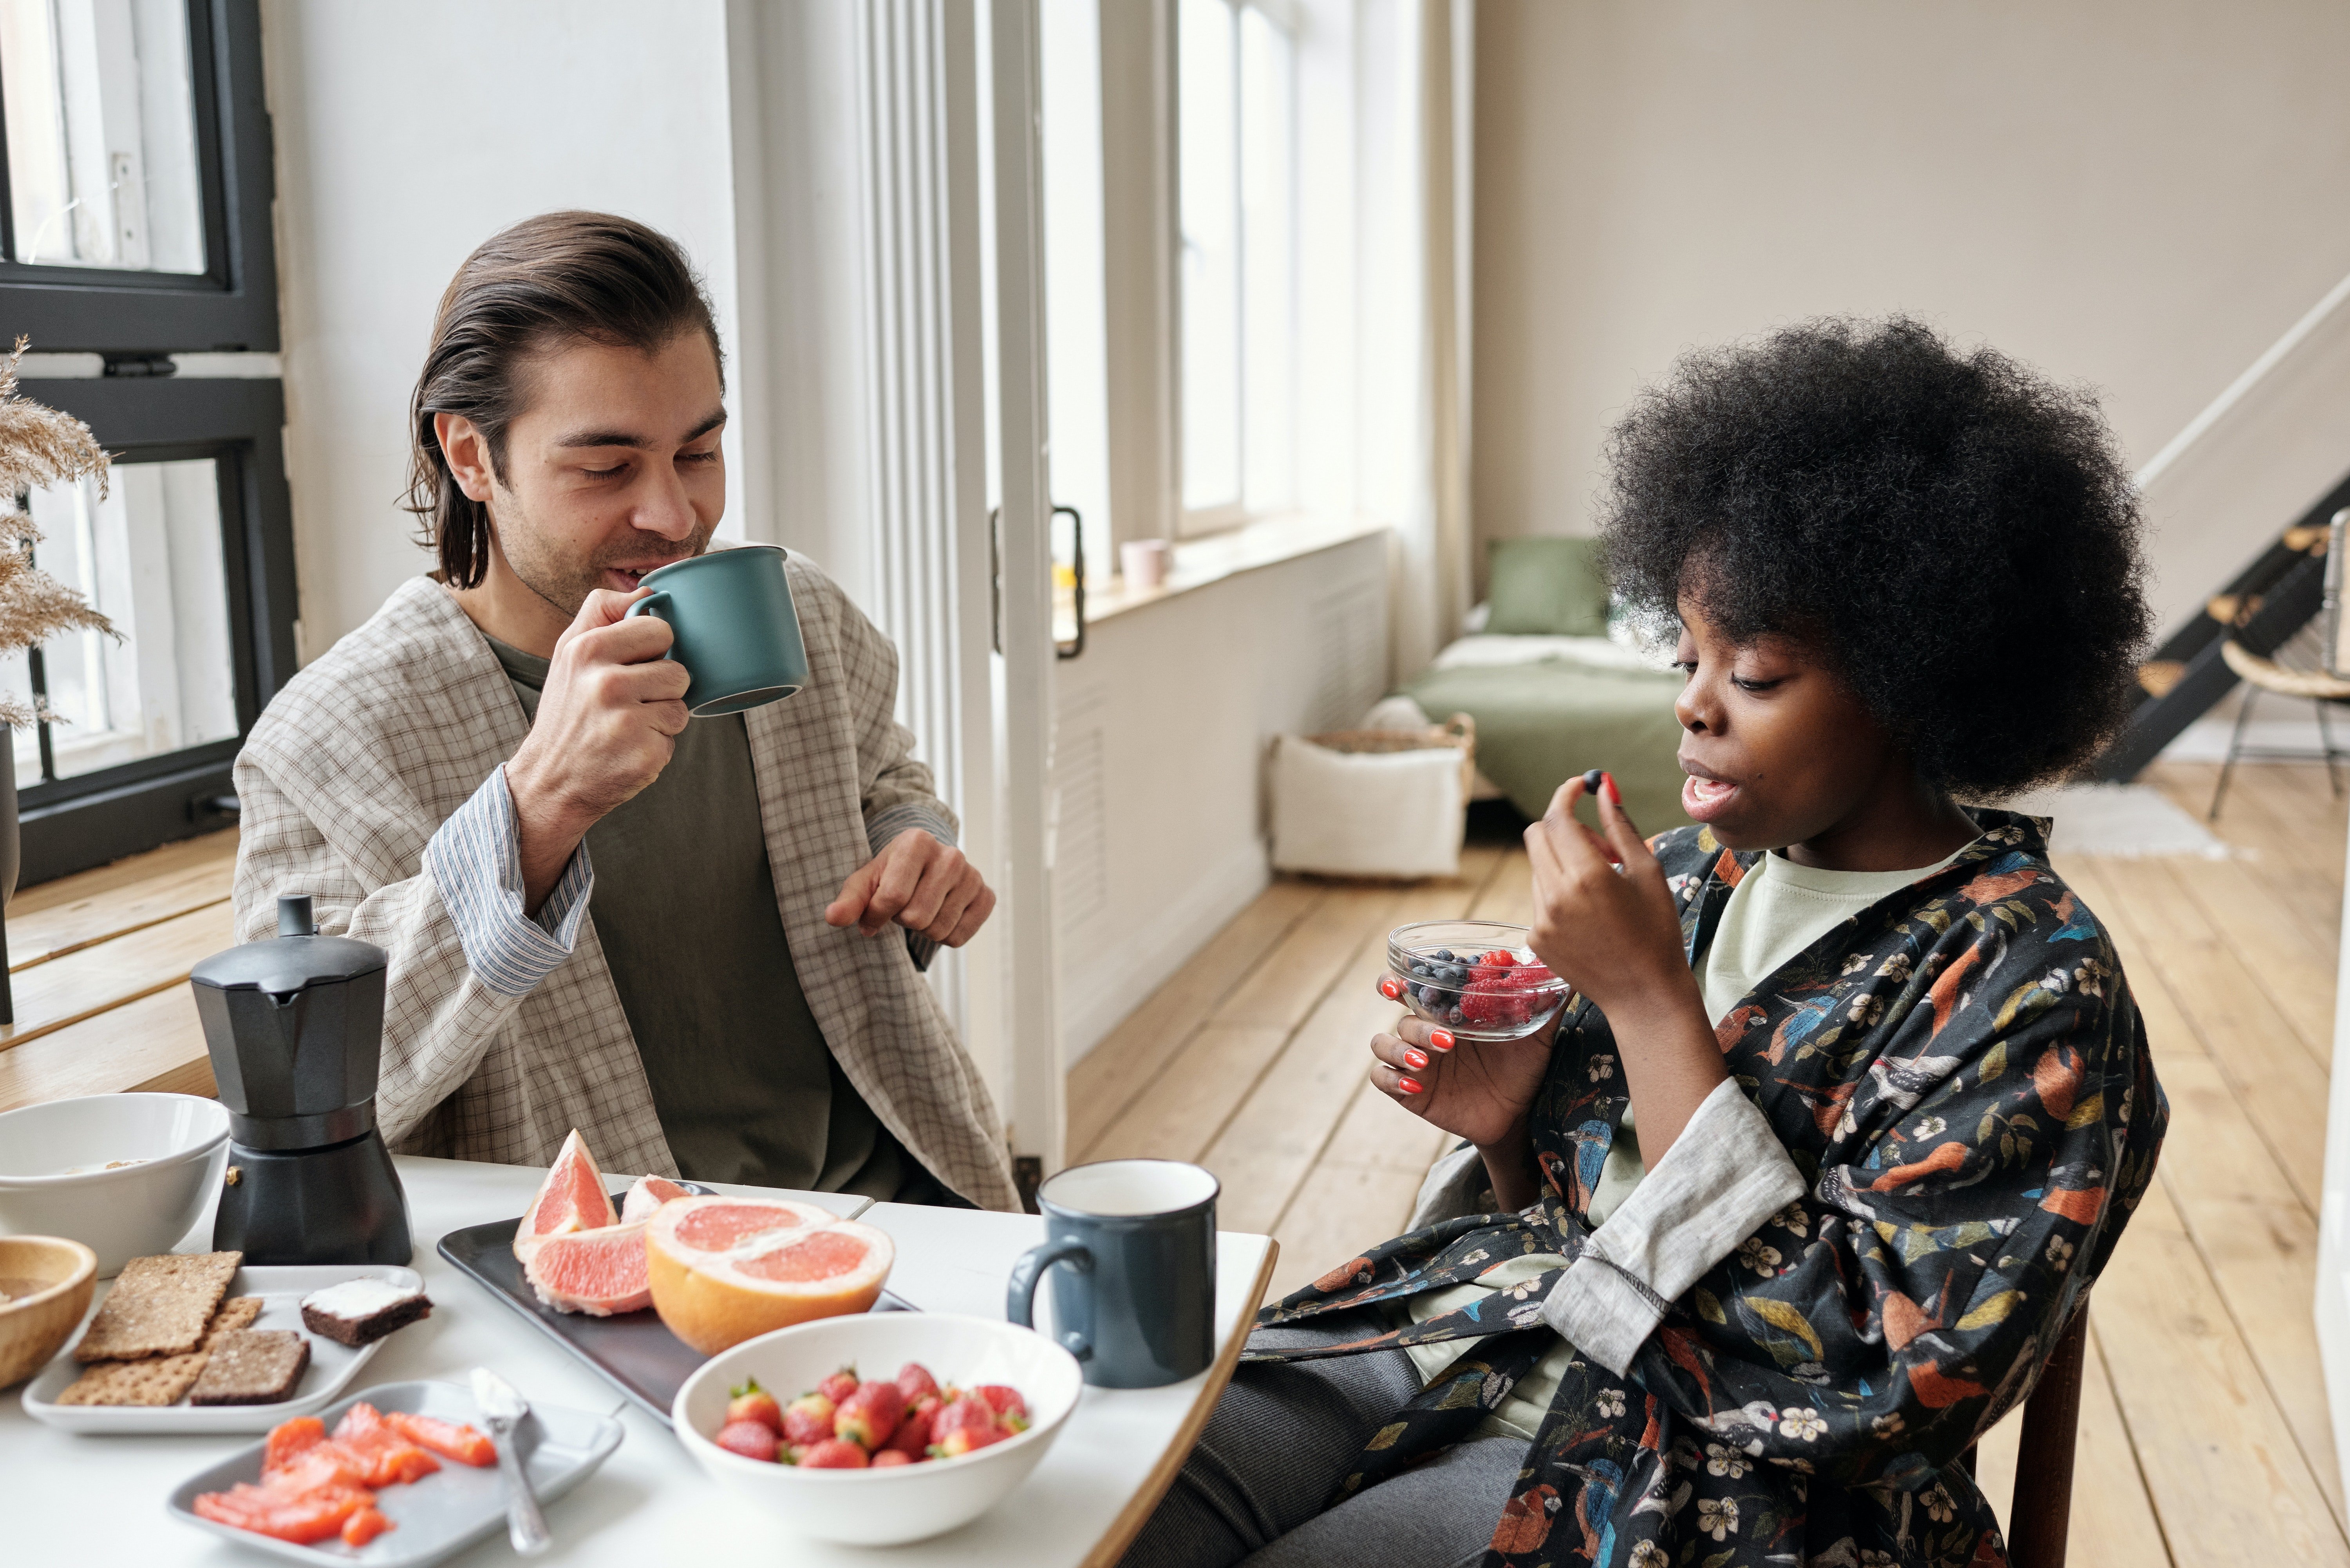 A man and woman drinking tea together. | Pexels/ Jack Sparrow